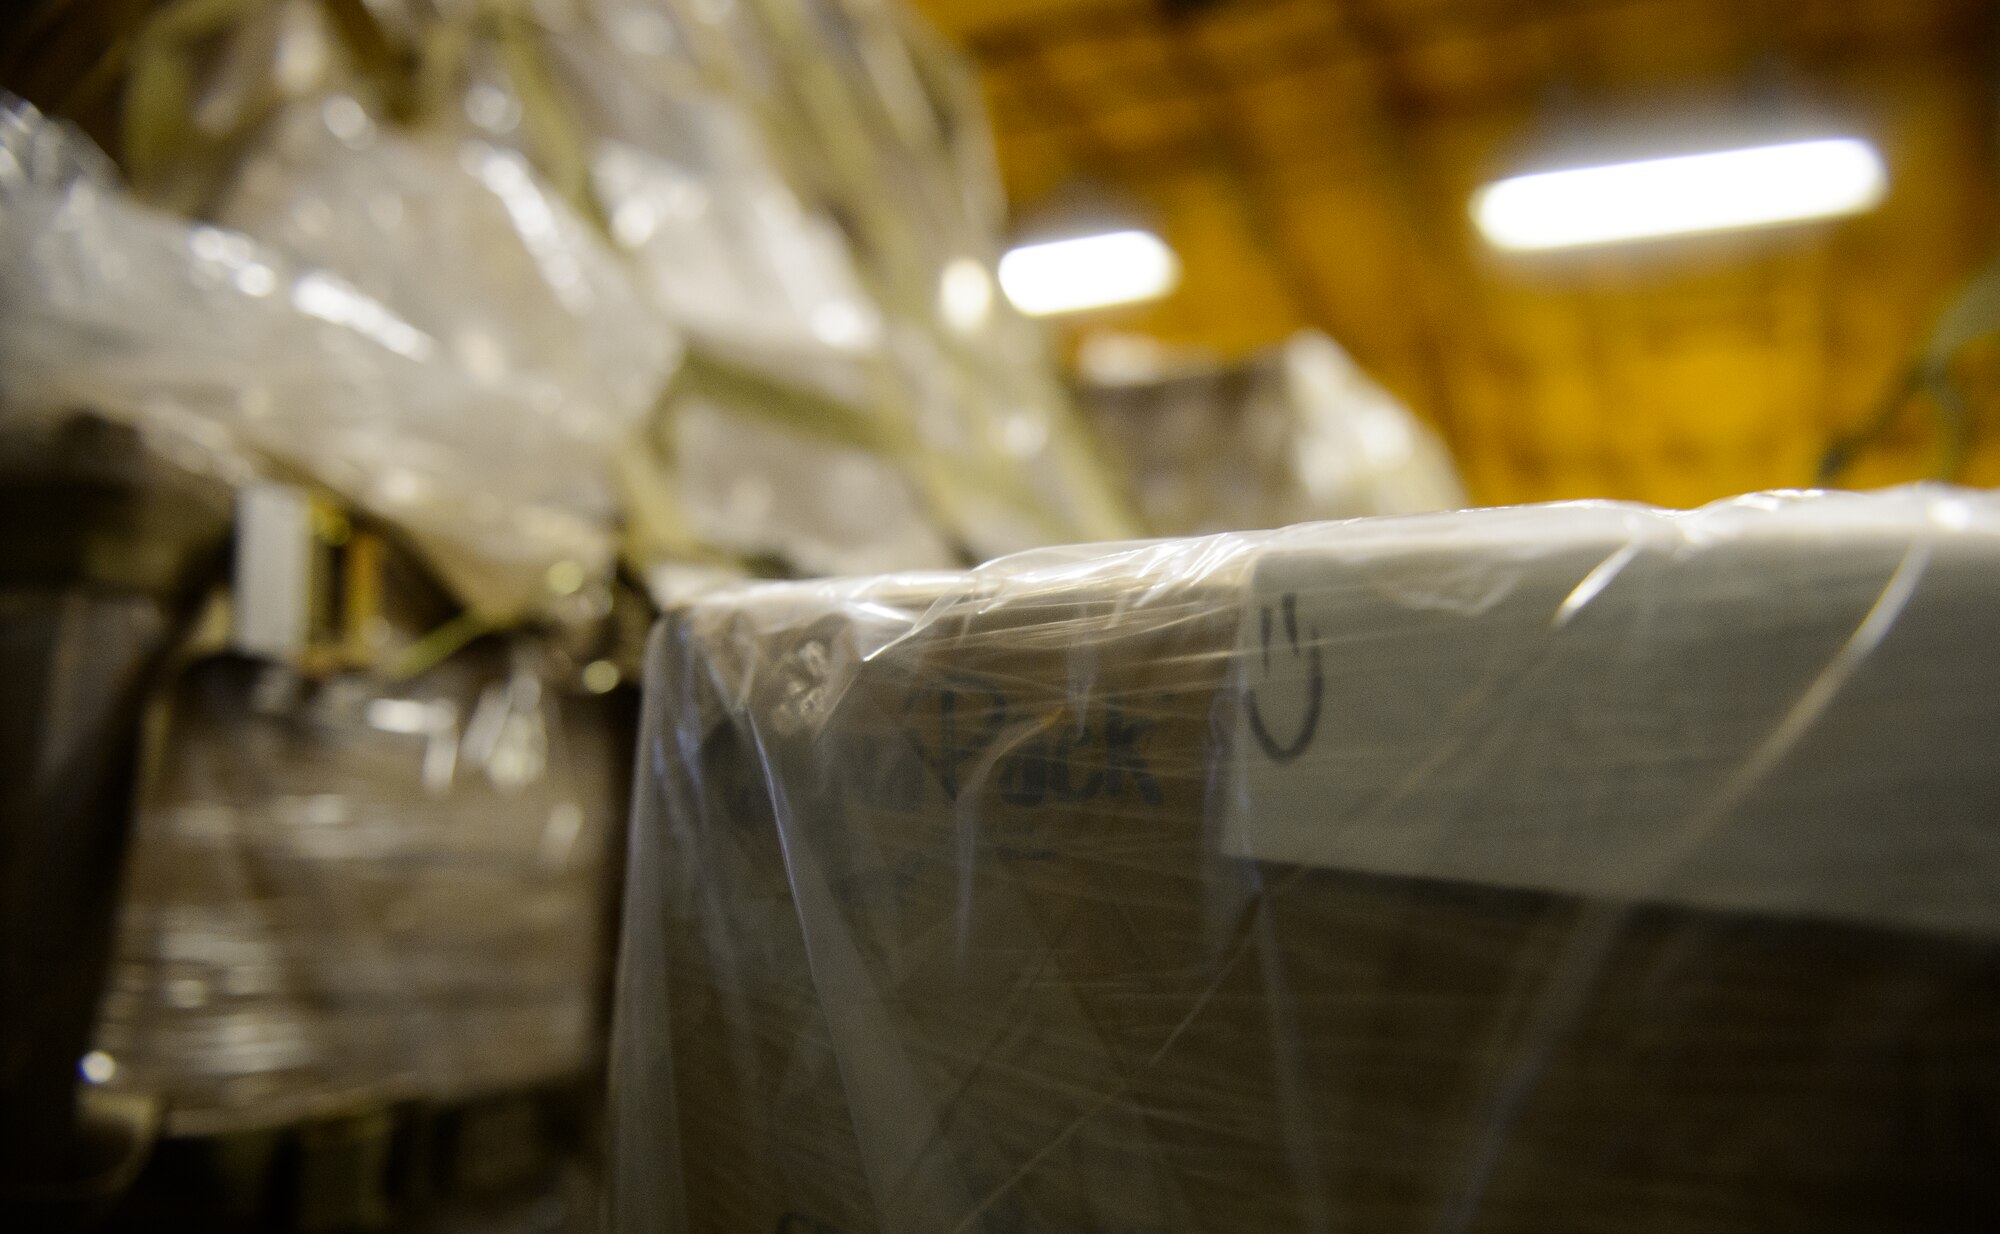 Cargo pallets wait as Airmen from the 521st Air Mobility Operations Wing offload them from a KC-10 Extender March 25, 2016, at Ramstein Air Base, Germany. Cargo regularly flows through Ramstein’s ramps however the cargo brought by the KC-10 was to provide meals for children in need. (U.S. Air Force photo/Staff Sgt. Armando A. Schwier-Morales)